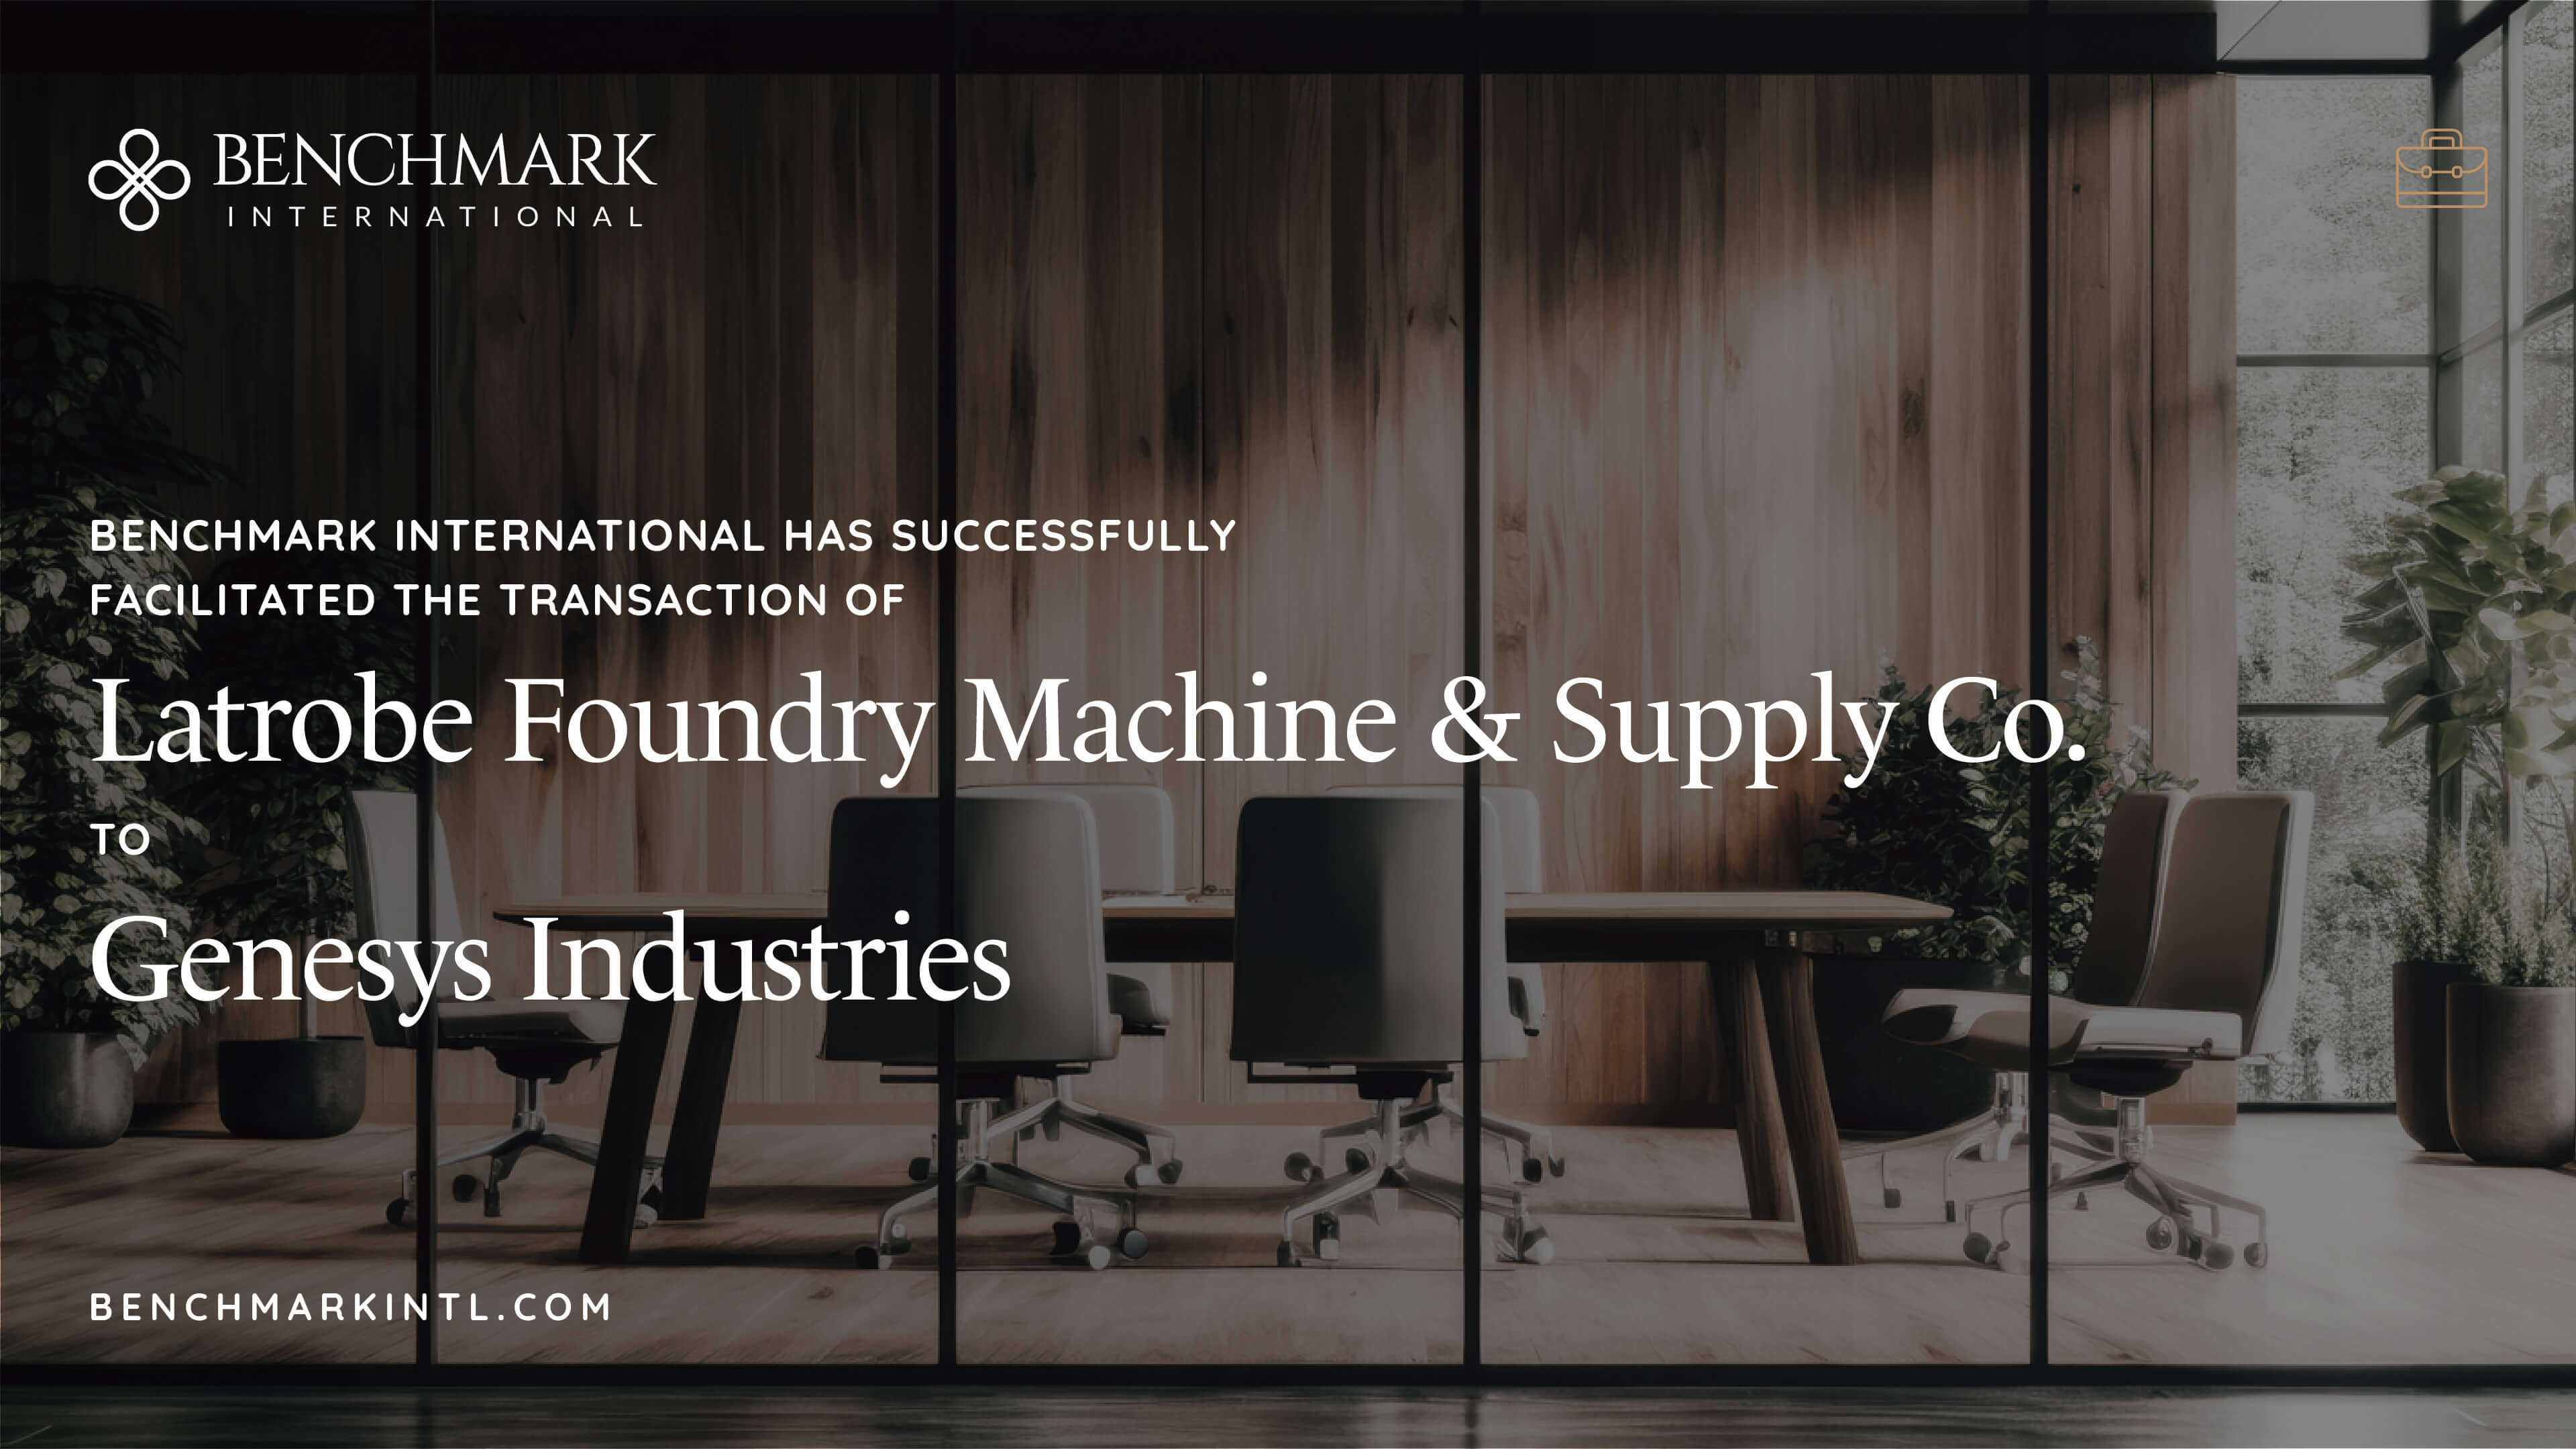 Benchmark International Has Successfully Facilitated The Transaction Of Latrobe Foundry Machine & Supply Co. To Genesys Industries